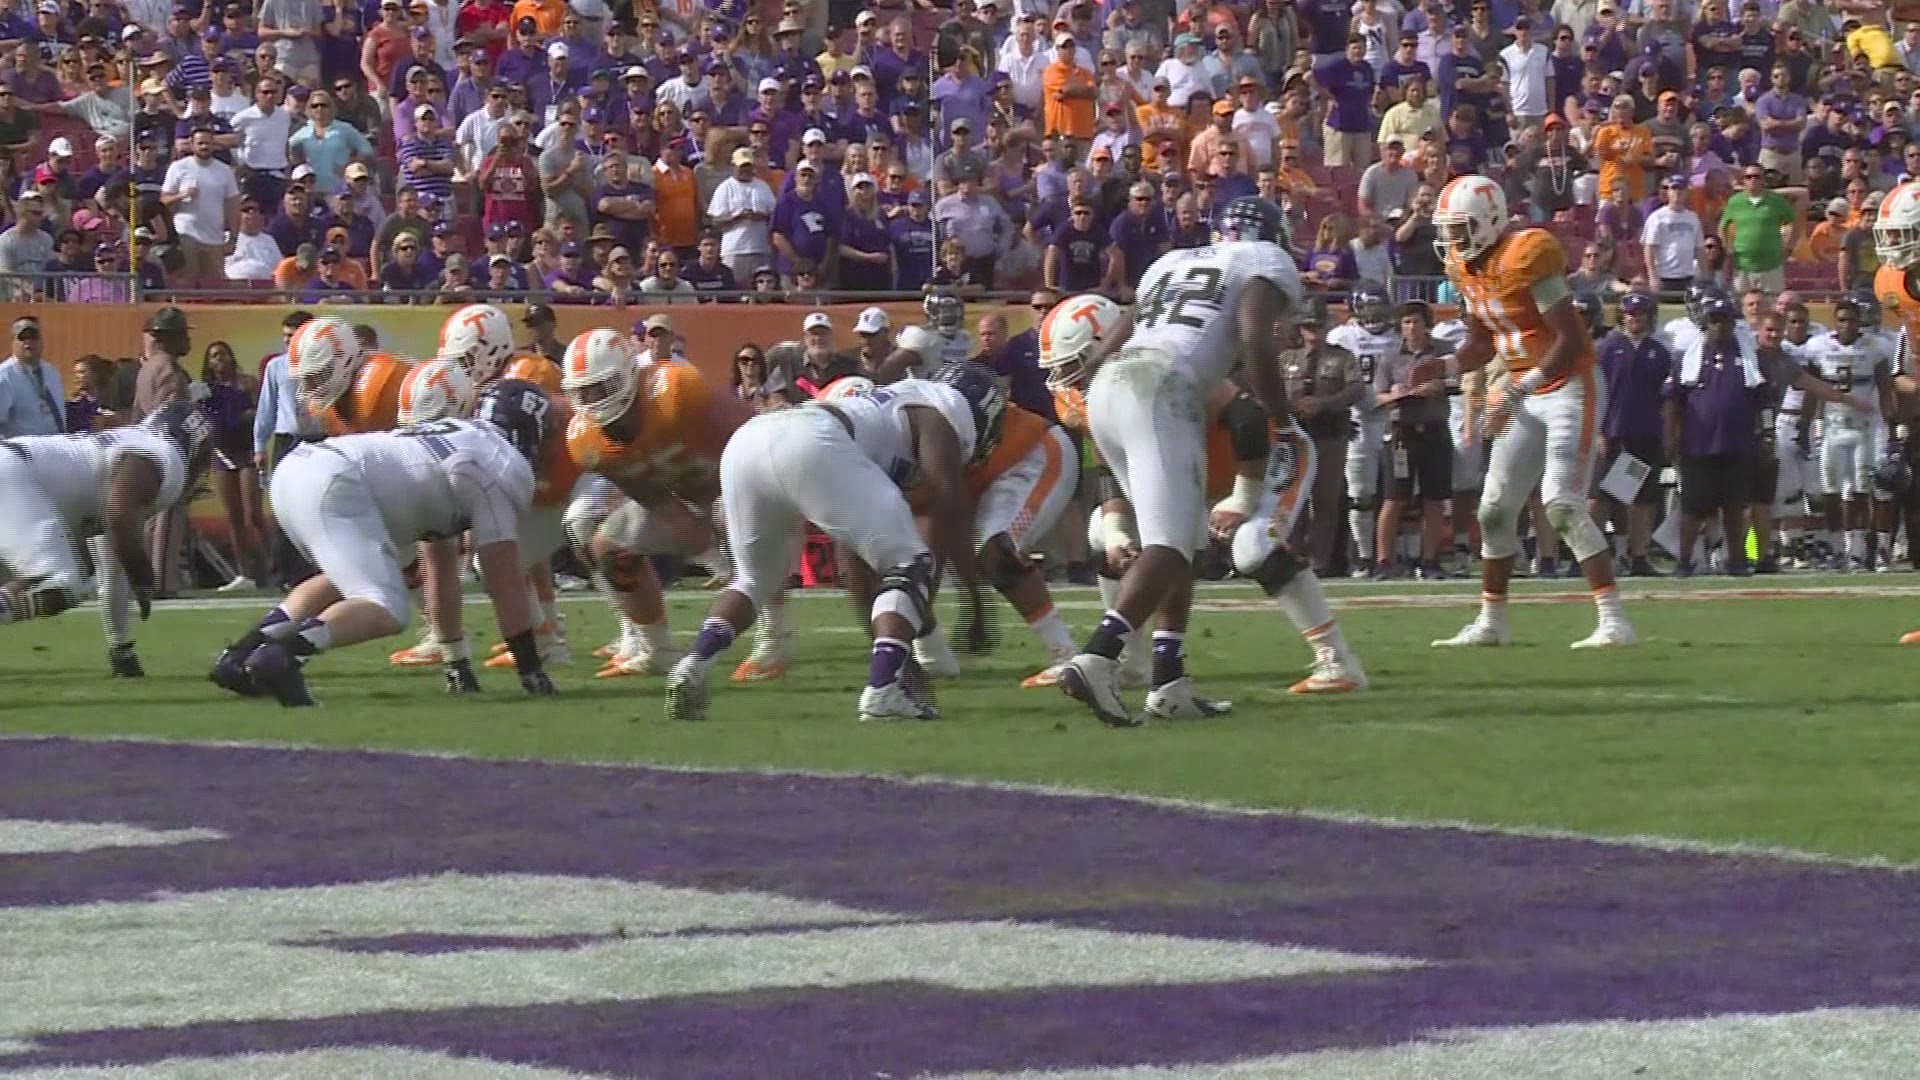 Courtney Lyle reports from Raymond James Stadium in Tampa, where Jalen Hurd's 130 rushing yards were a big part of Tennessee's 45-6 Outback Bowl win over Northwestern.